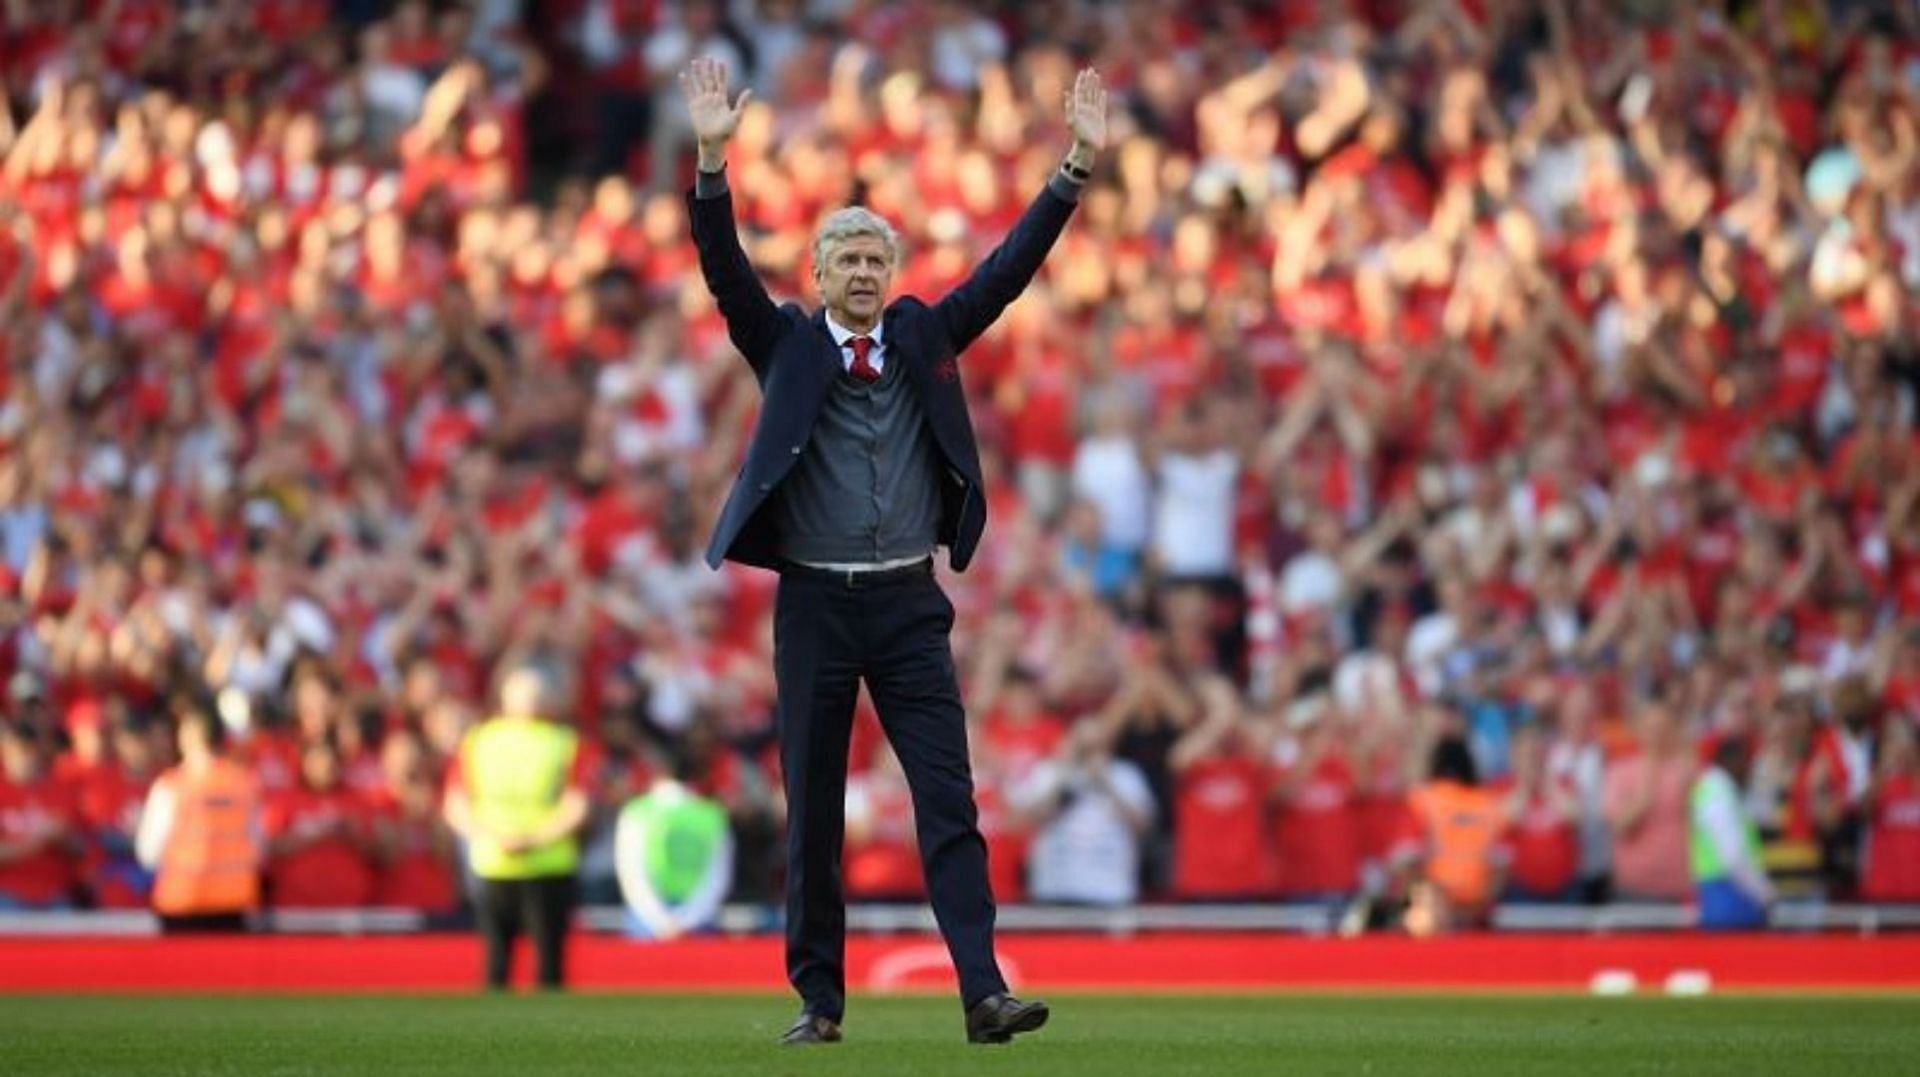 Arsene Wenger is one of the gentlemen of the beautiful game.